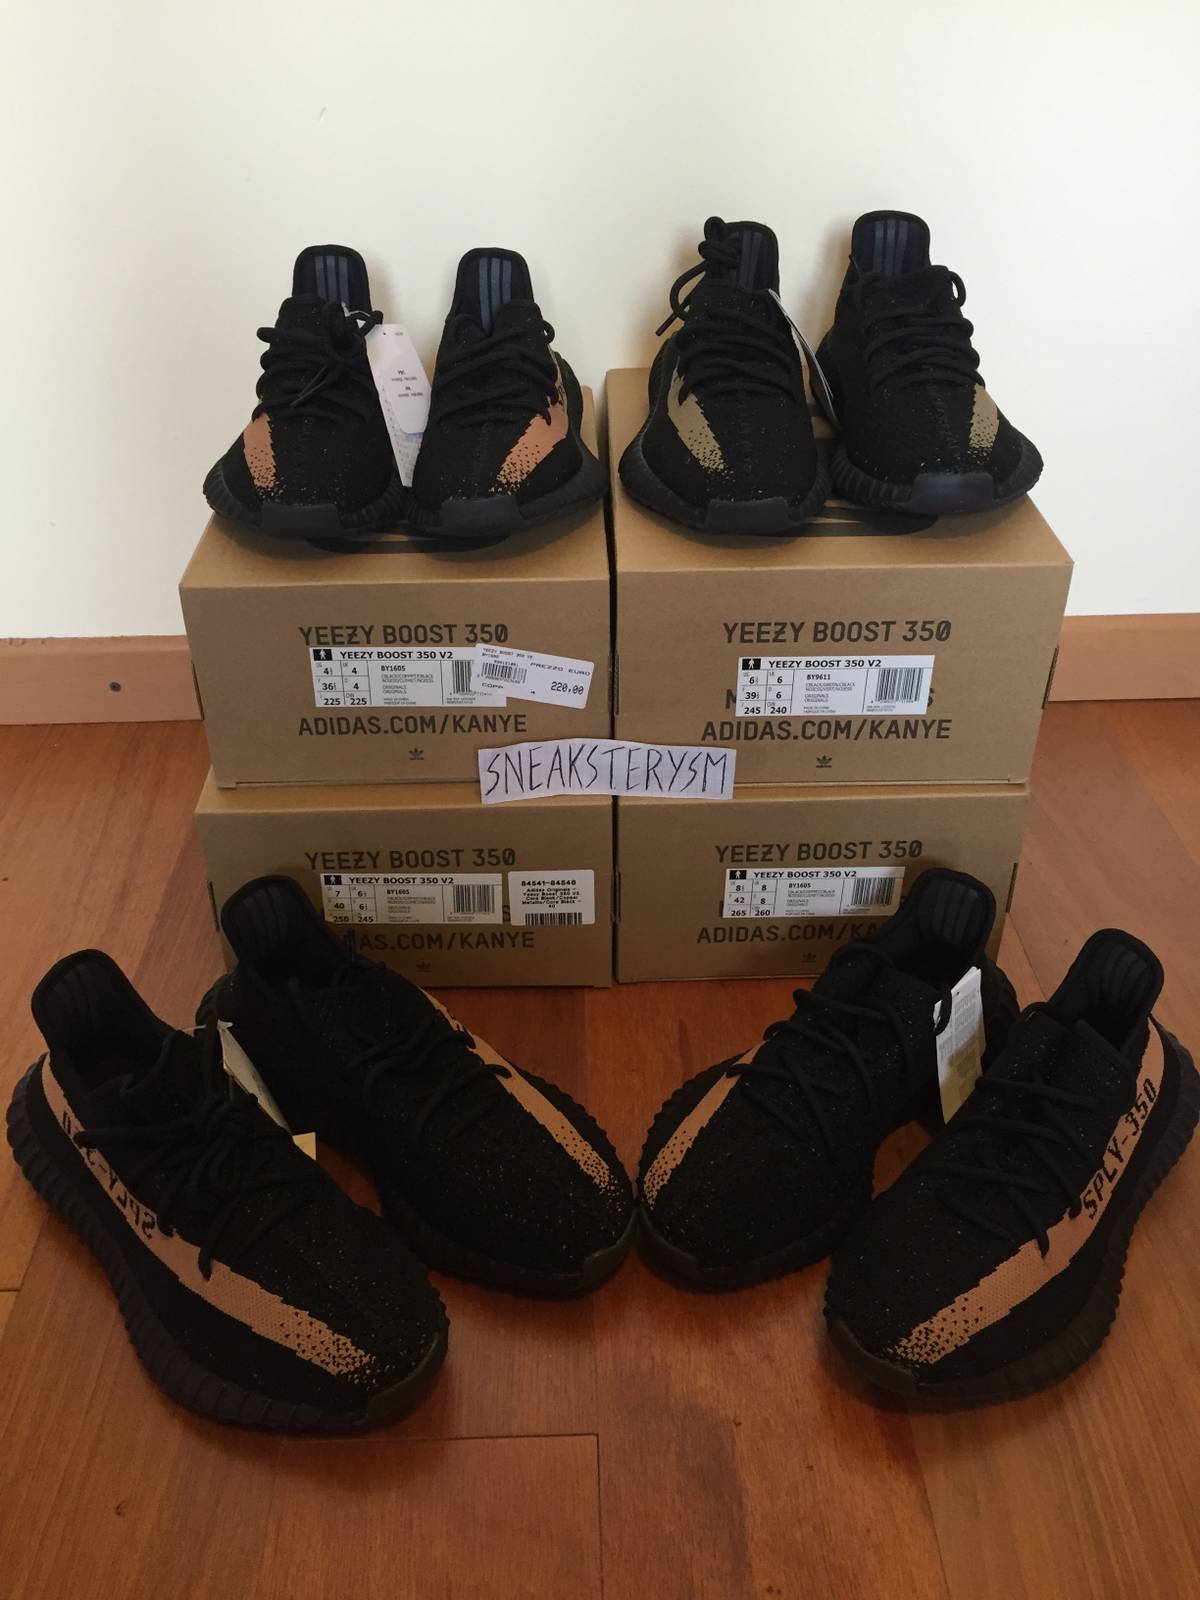 Yeezy Boost 350 V 2 Core Black / Core White $ 200 BY 1604 SMO